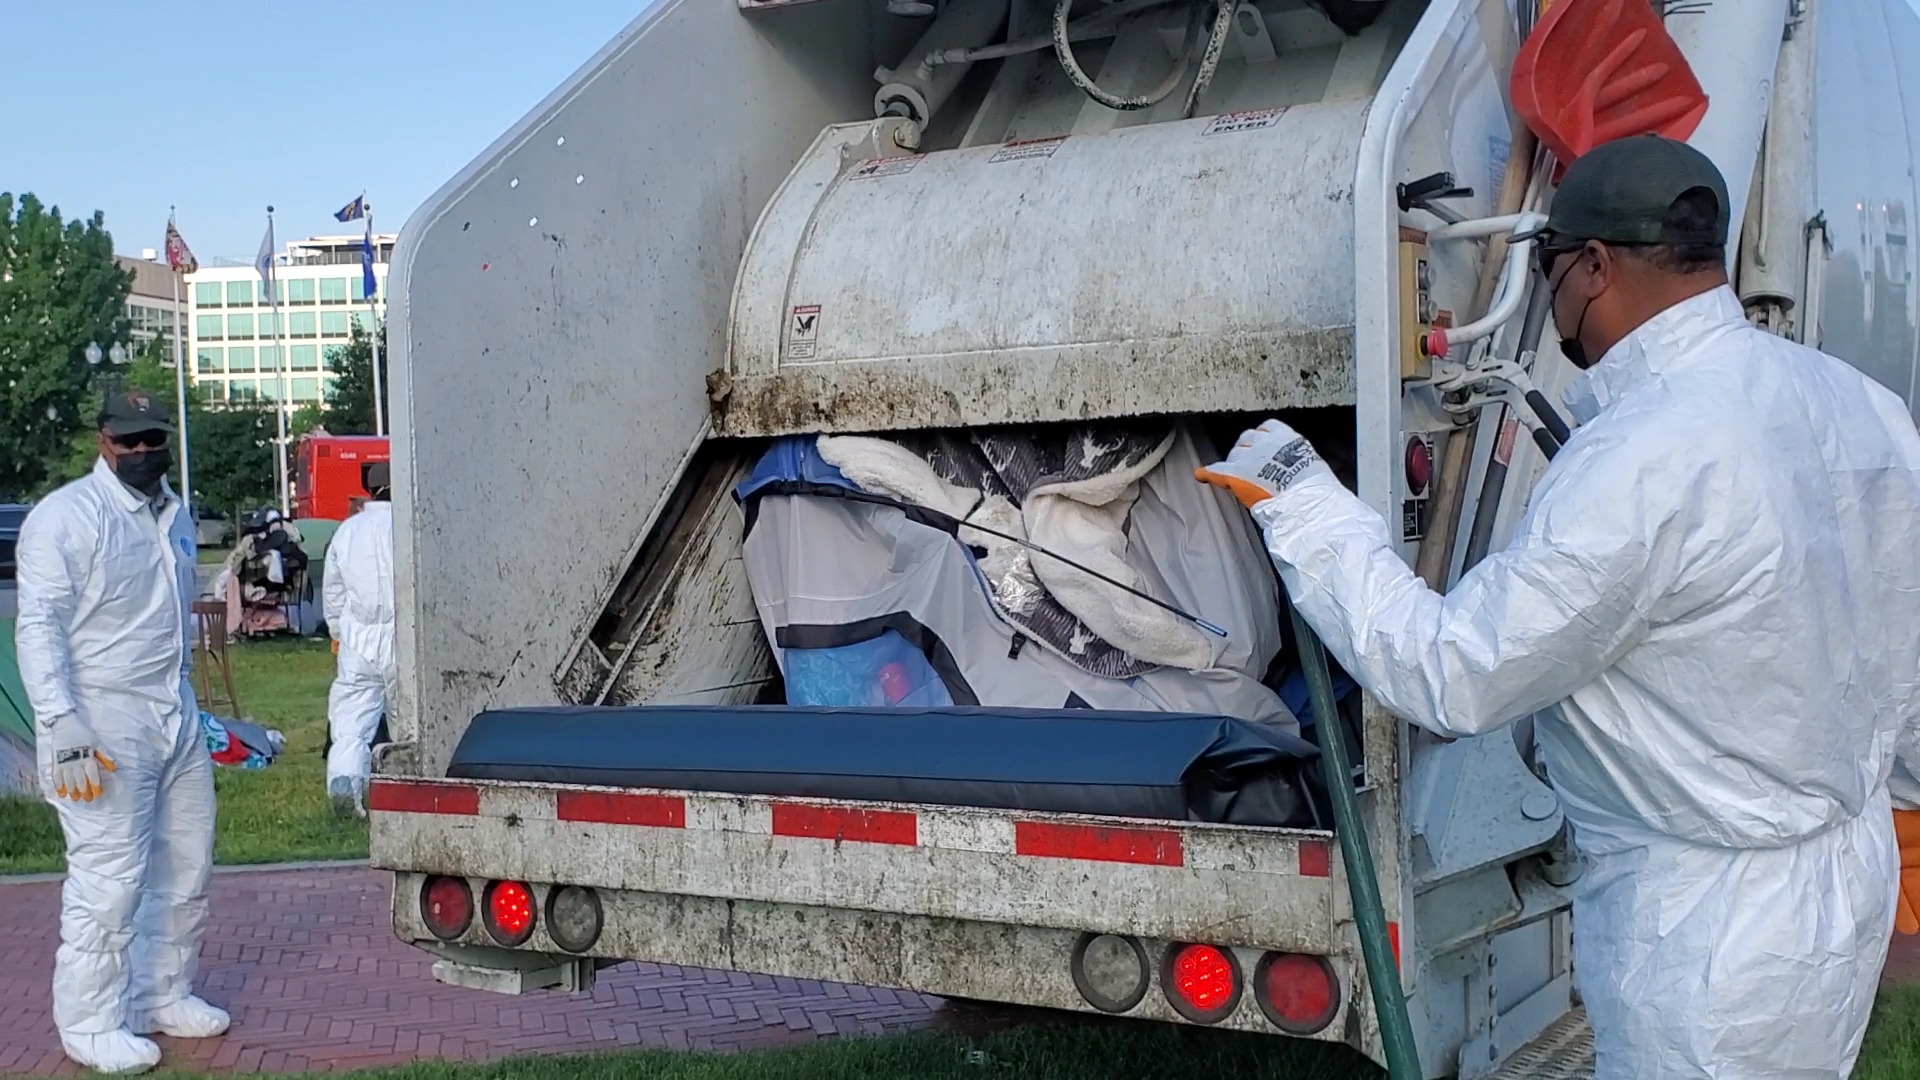 Two people in white protective suits look at a trash truck filled with tents.